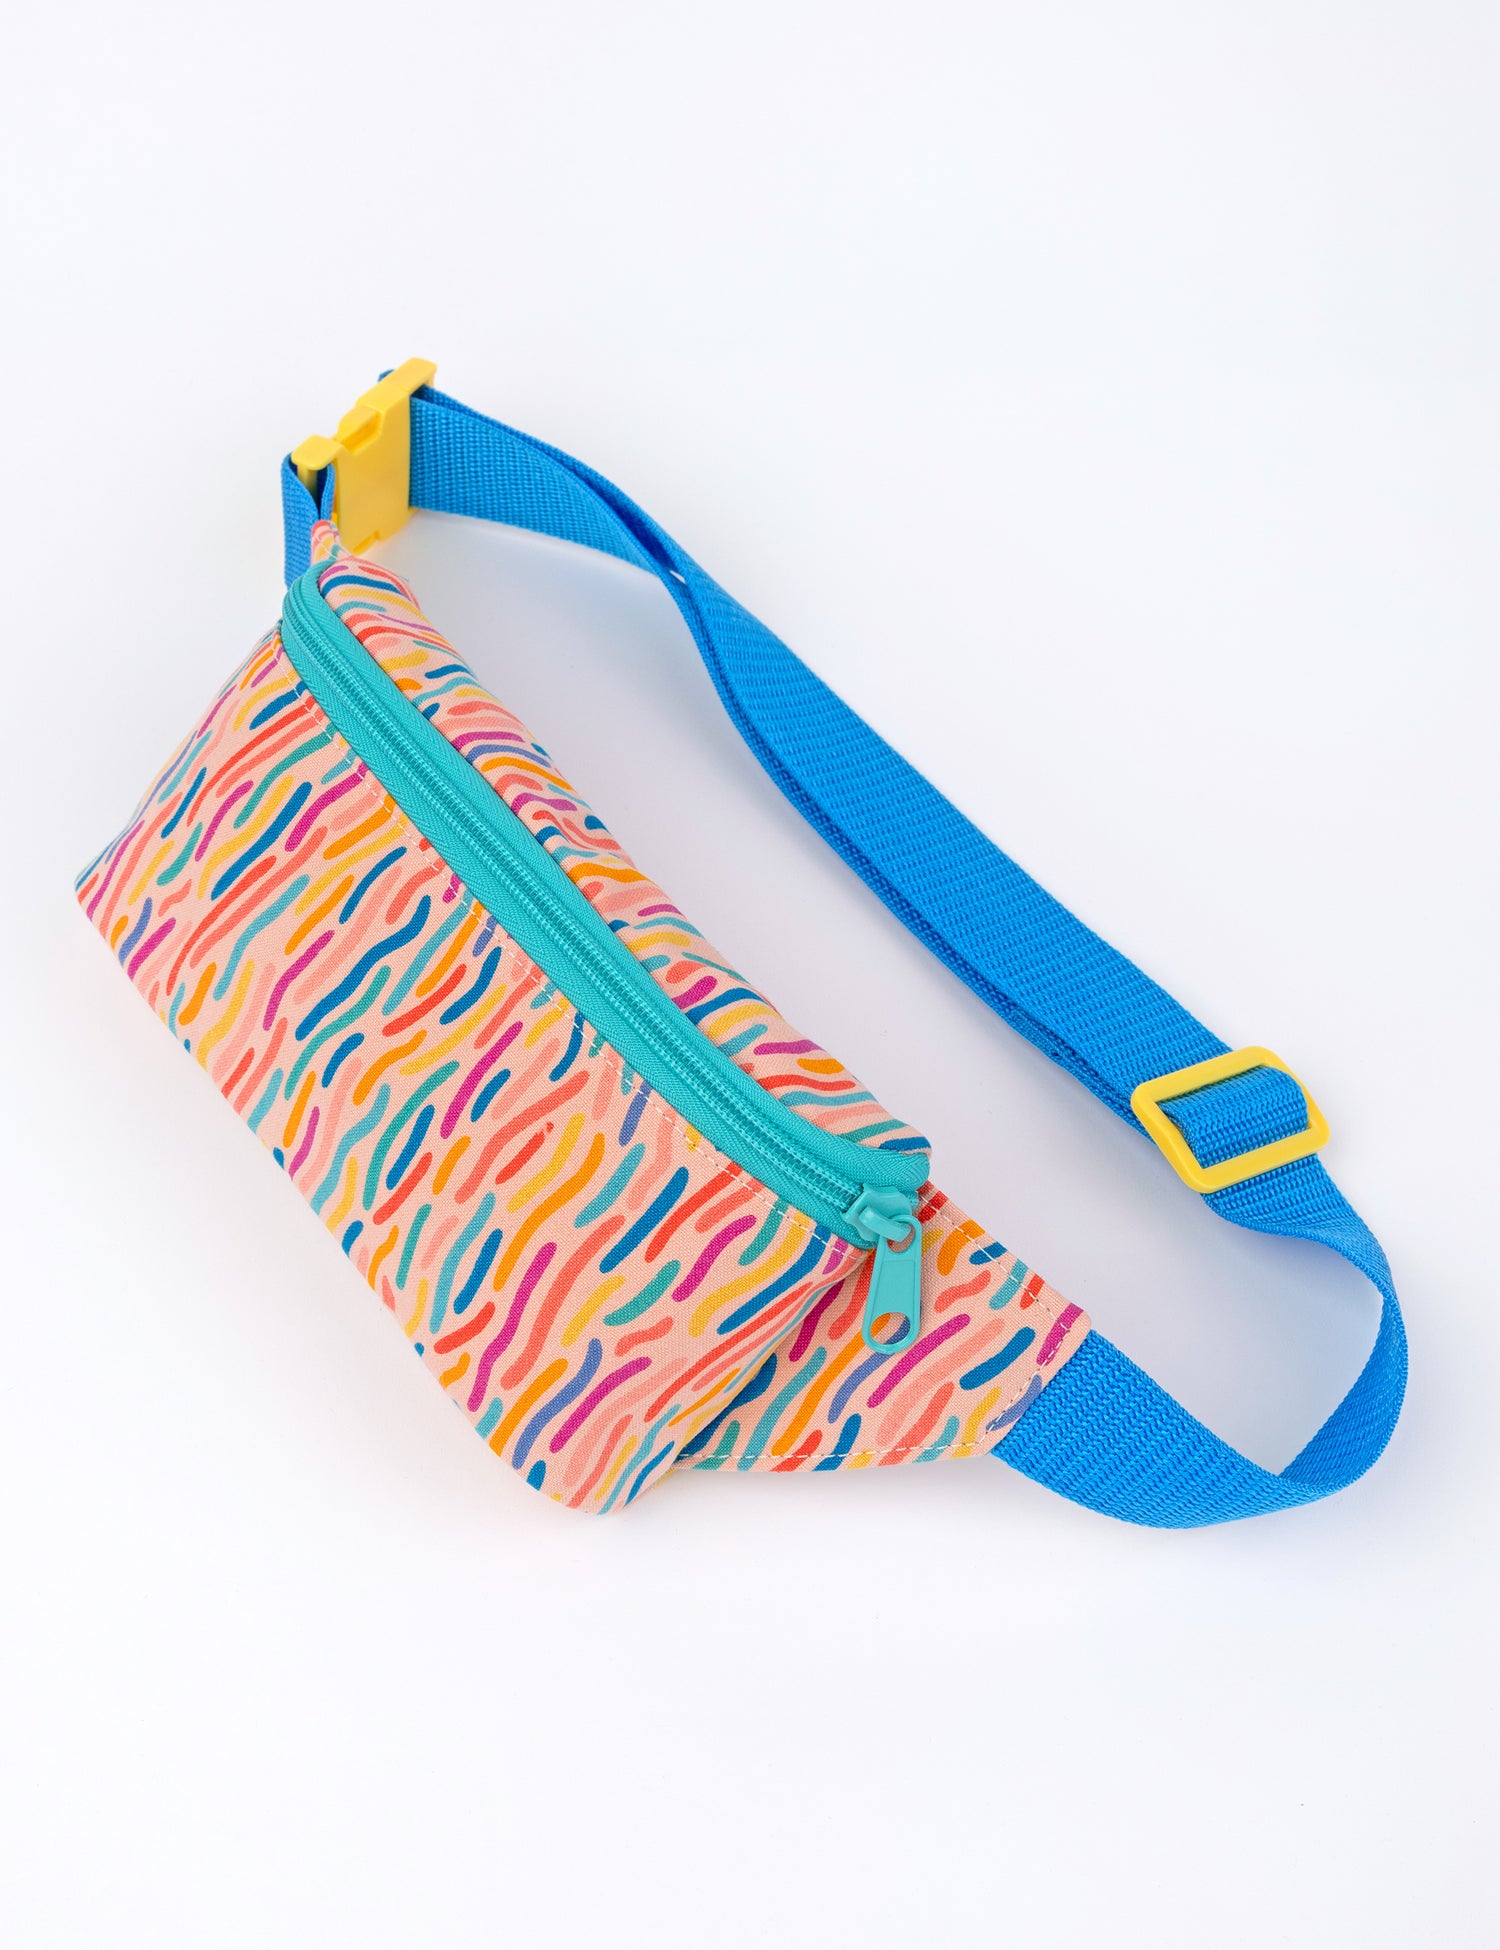 small coral colored fanny pack with confetti style colorful designs and blue straps